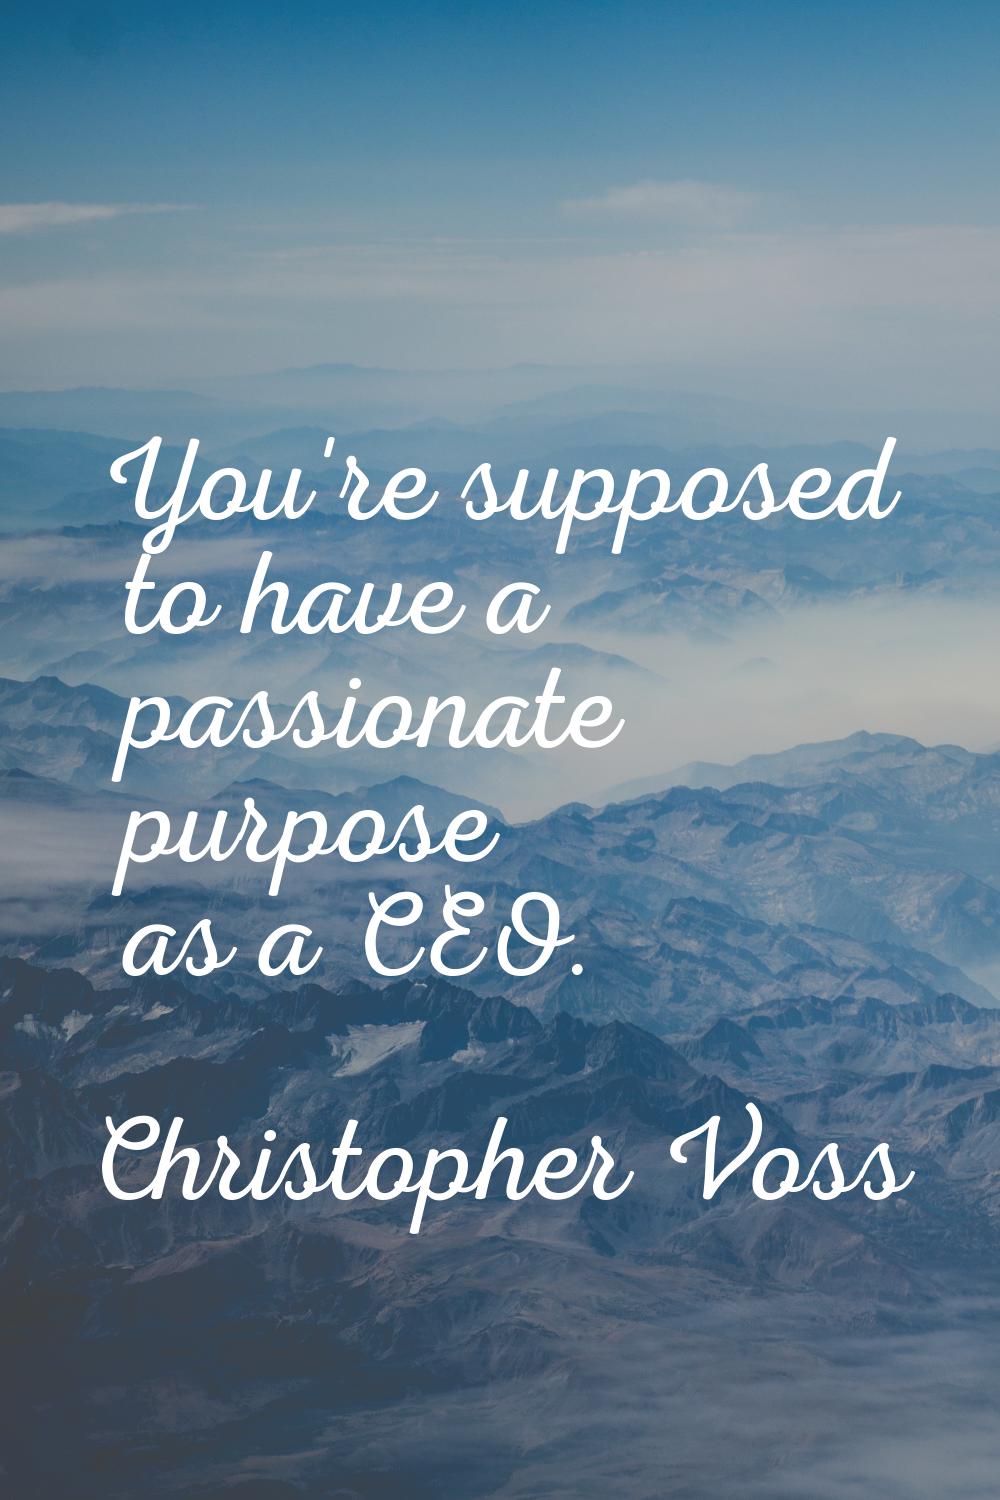 You're supposed to have a passionate purpose as a CEO.